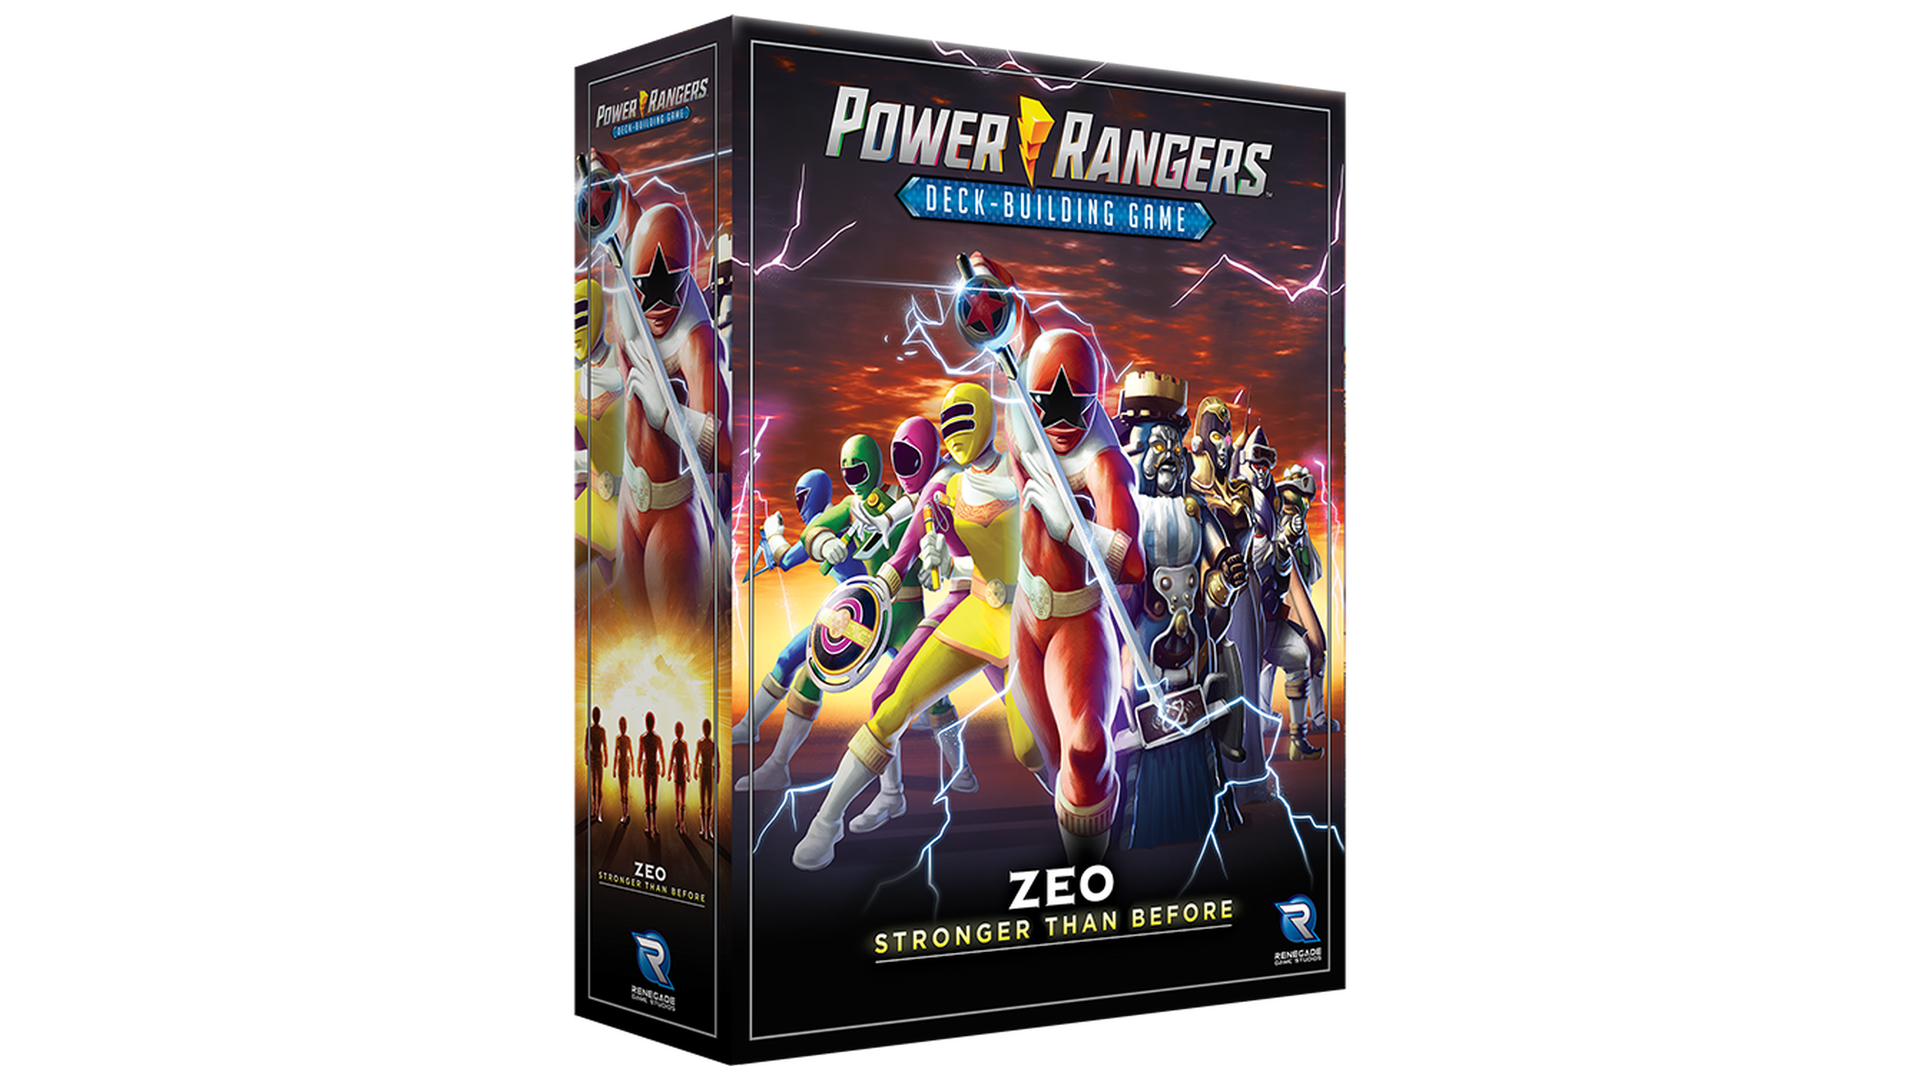 Power Rangers: Deck-Building Game - Zeo game box